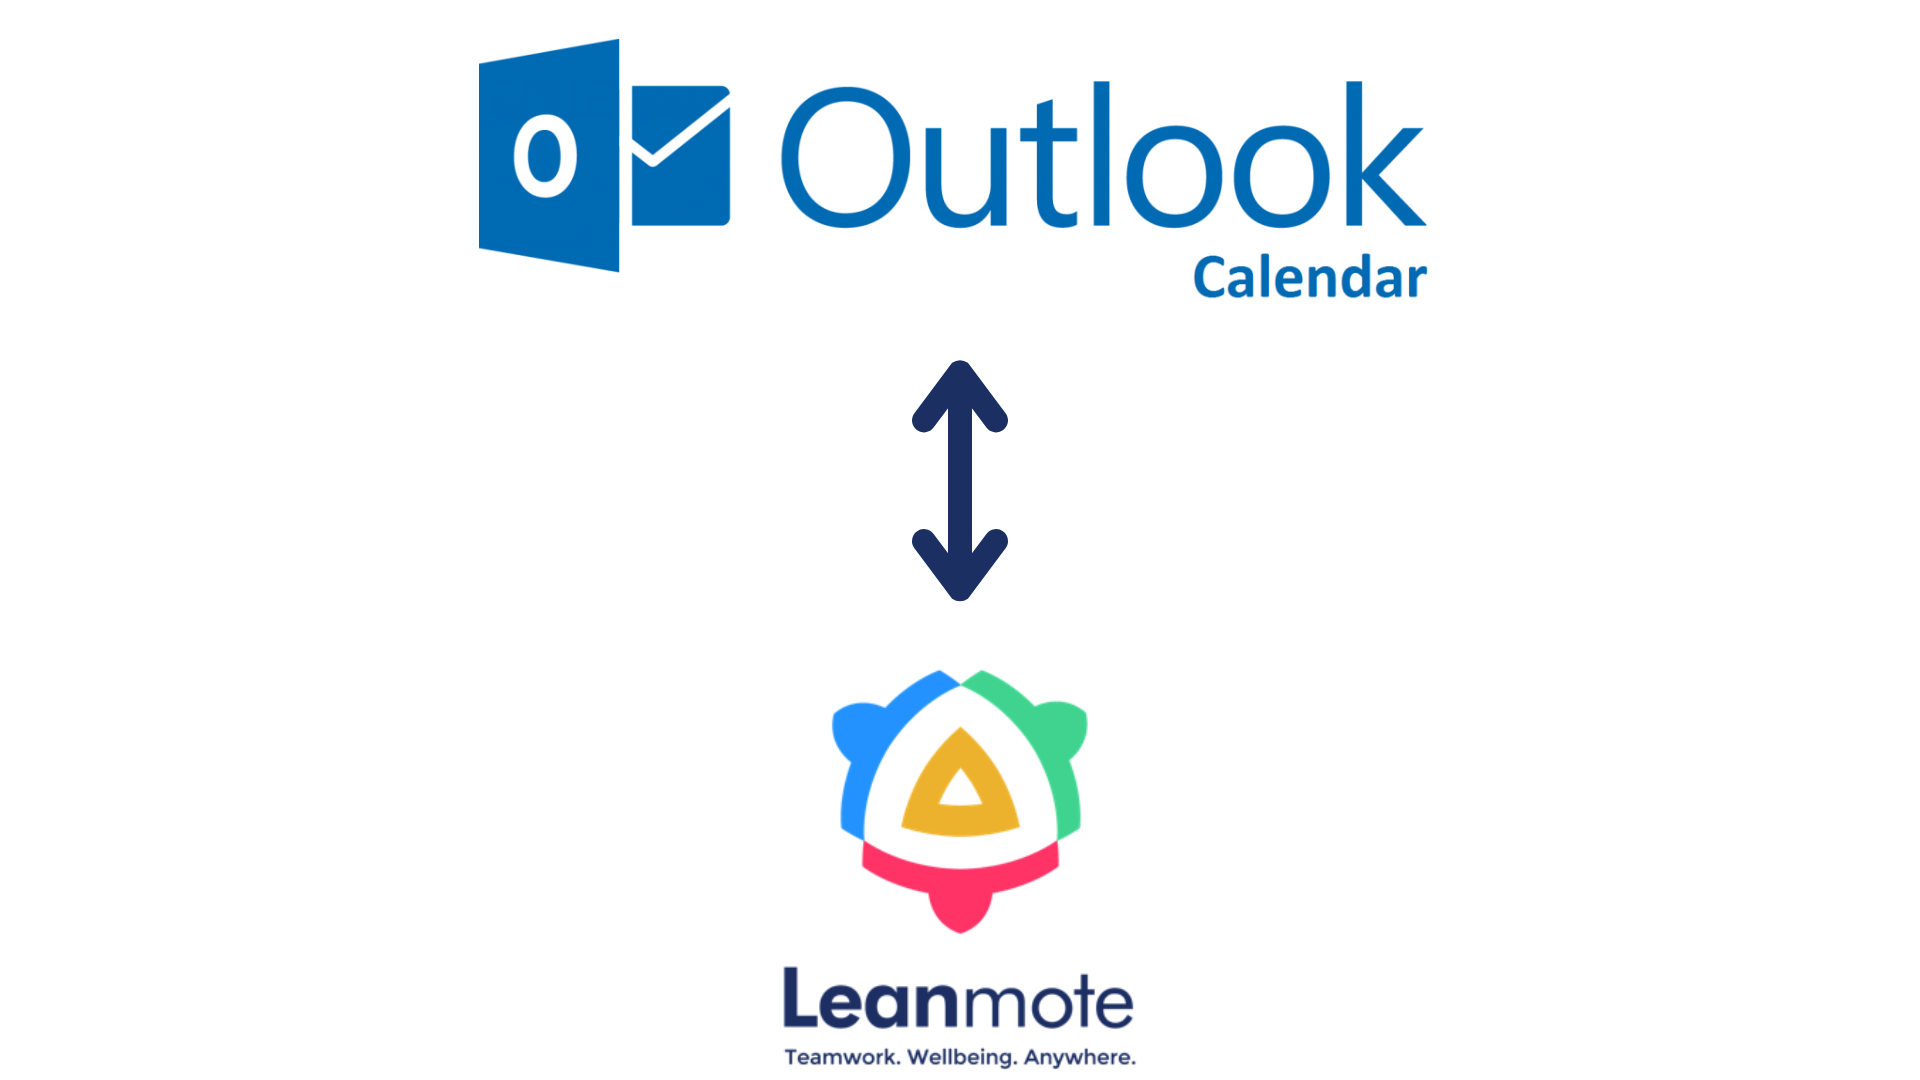 Staying posted with Outlook Calendar at Leanmote⌚